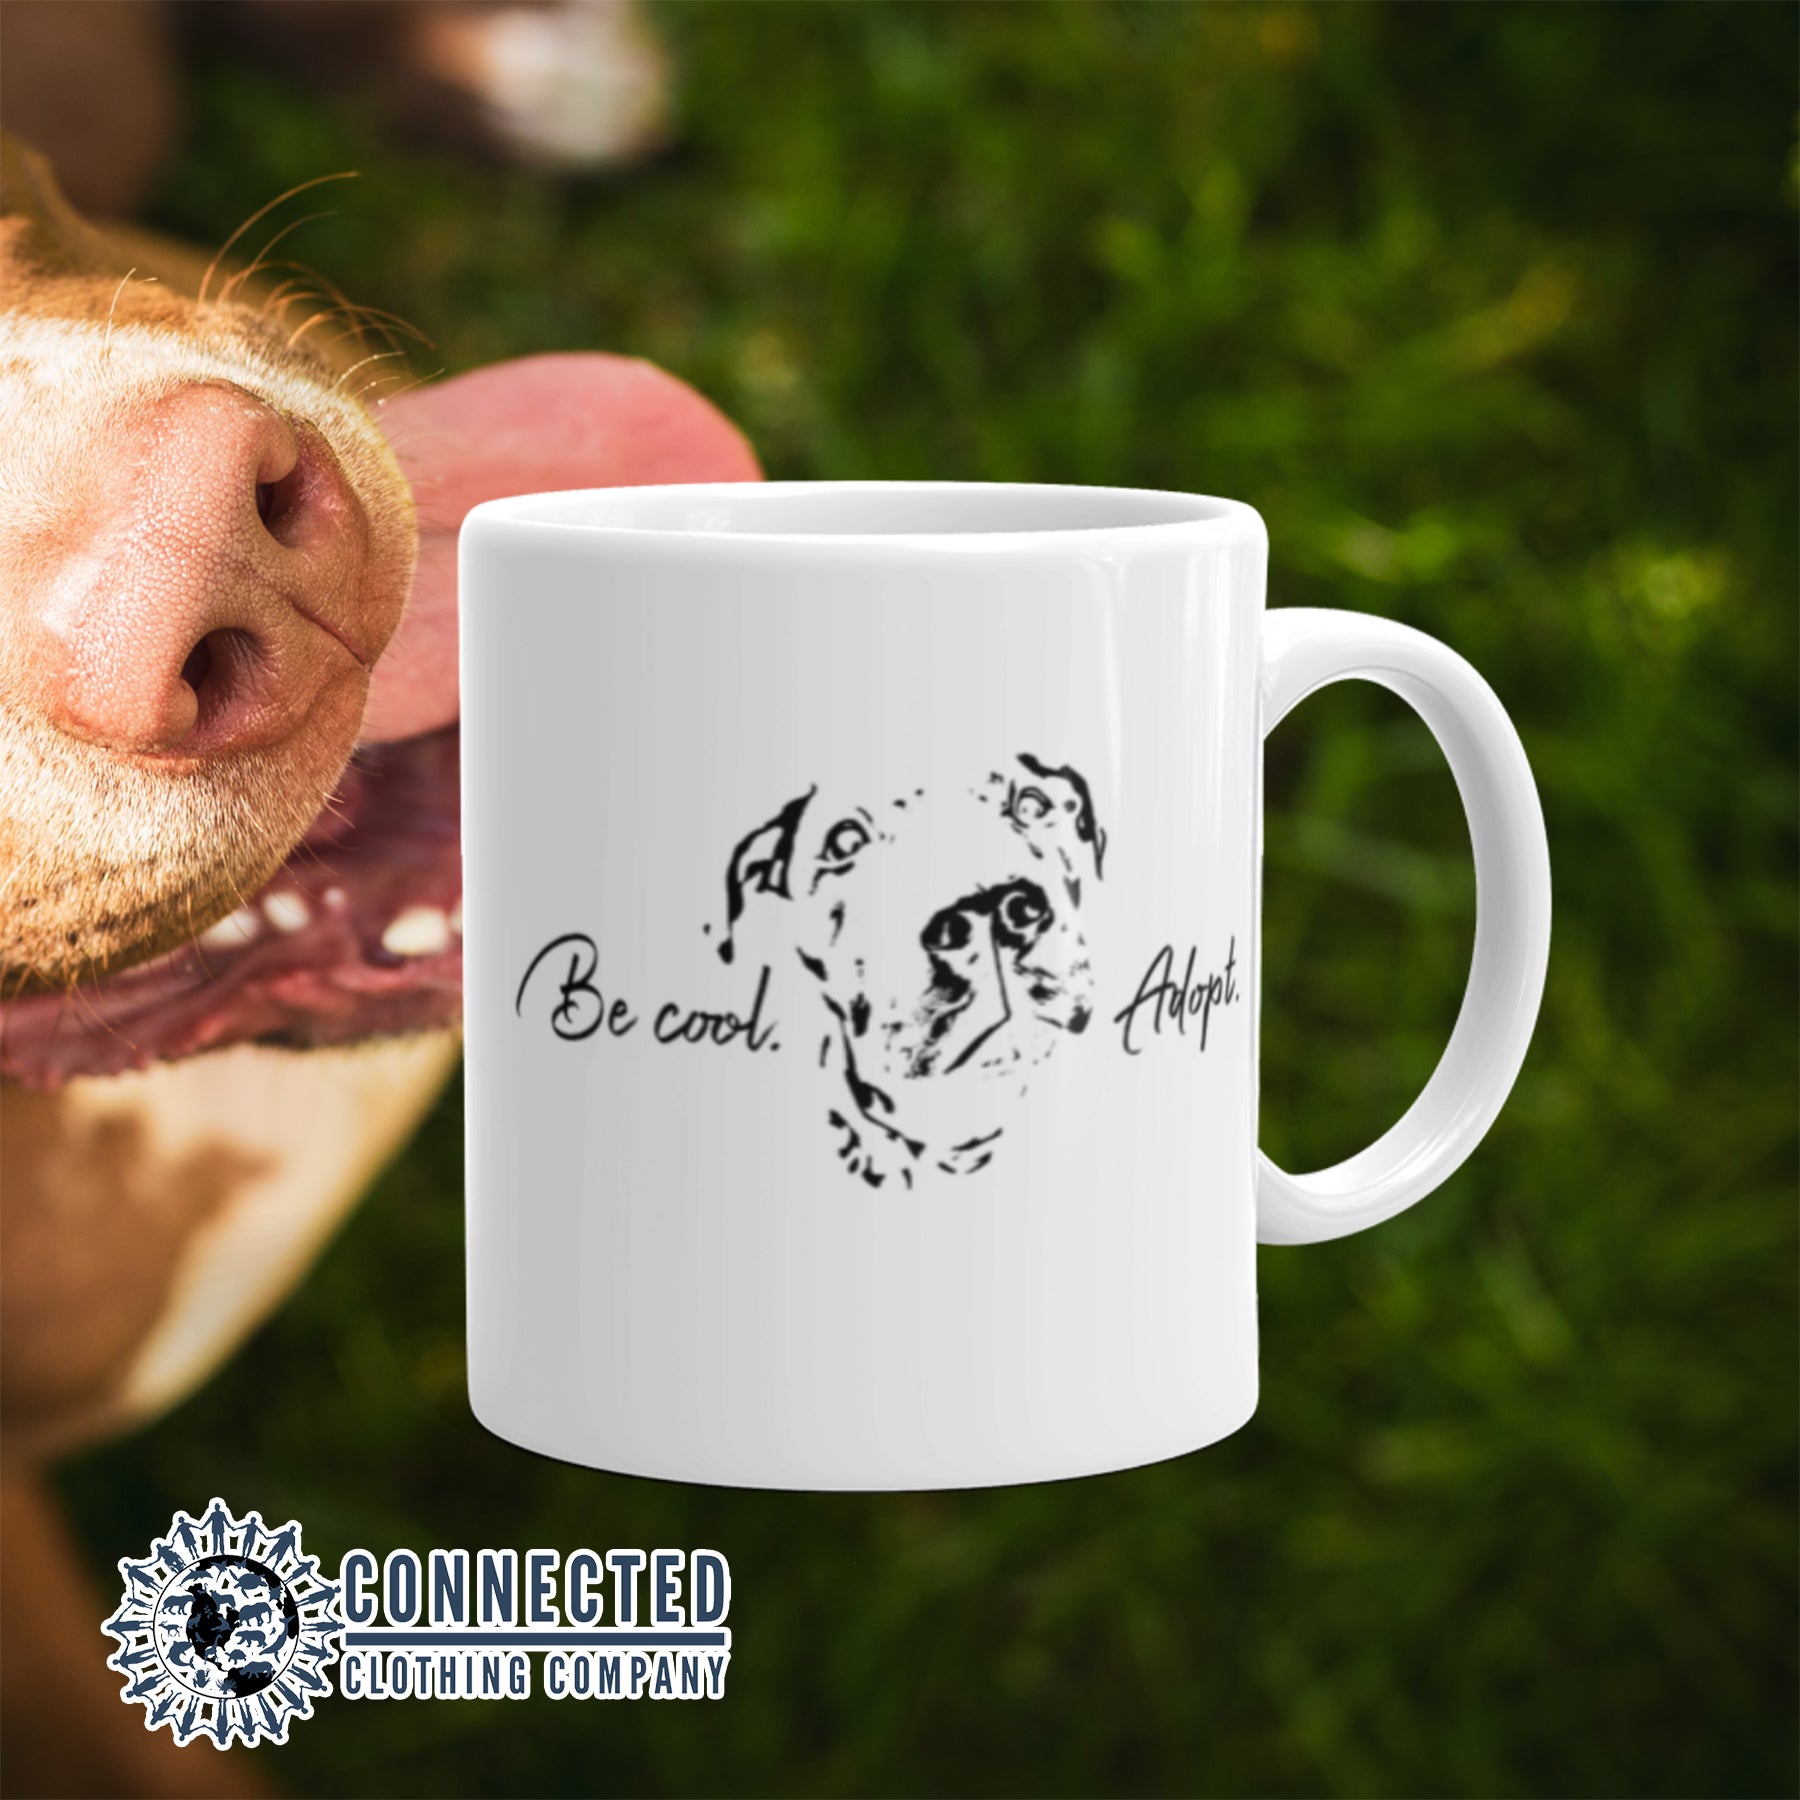 Be Cool Adopt Classic Mug - Connected Clothing Company - Ethically and Sustainably Made - 10% of profits donated to animal rescue organizations